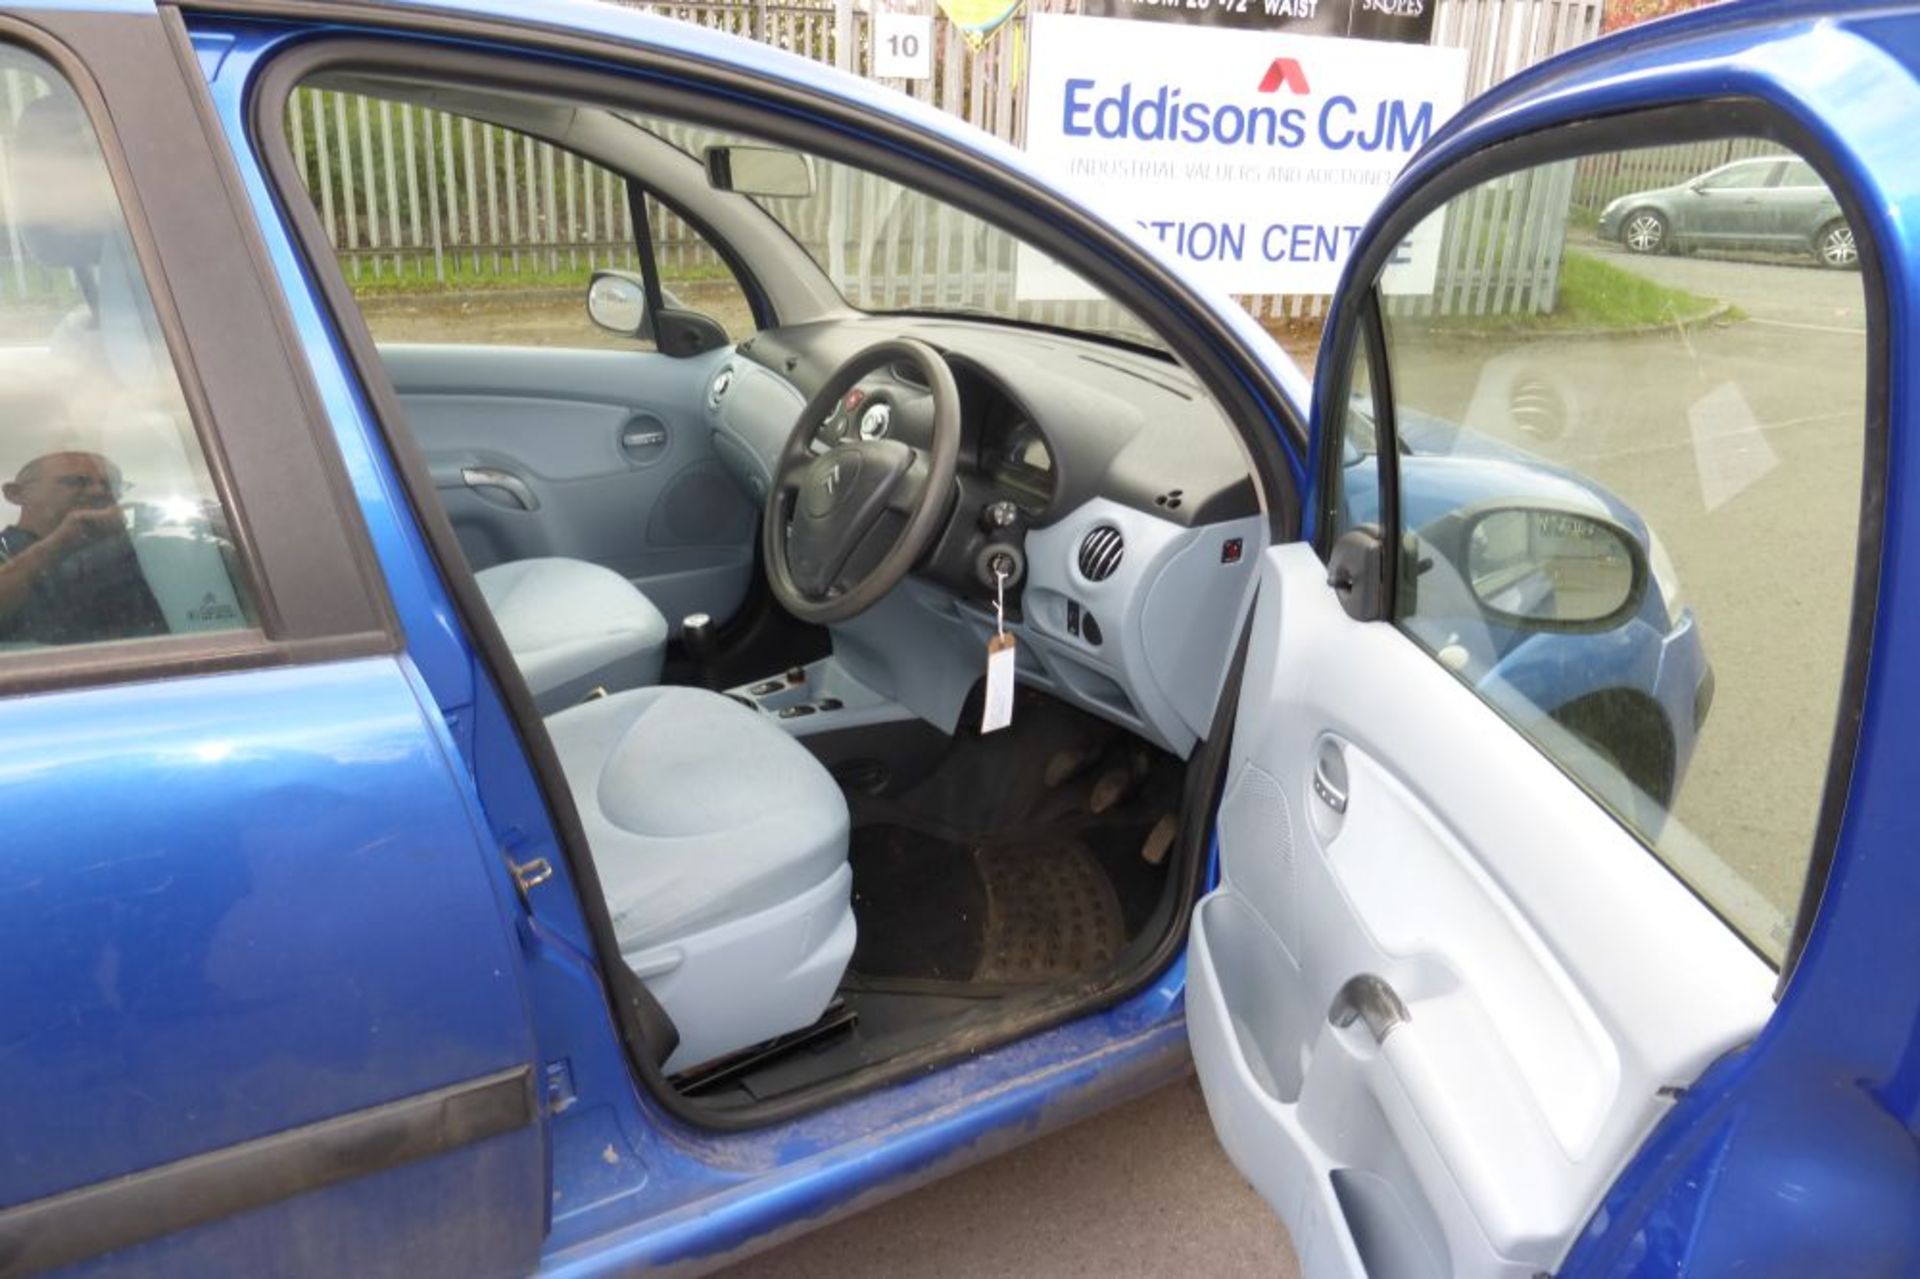 A Citroen C3 LX 1360cc Petrol, Date of First Registration 30.06.2003 comes with V5, 1 Key and - Image 7 of 11